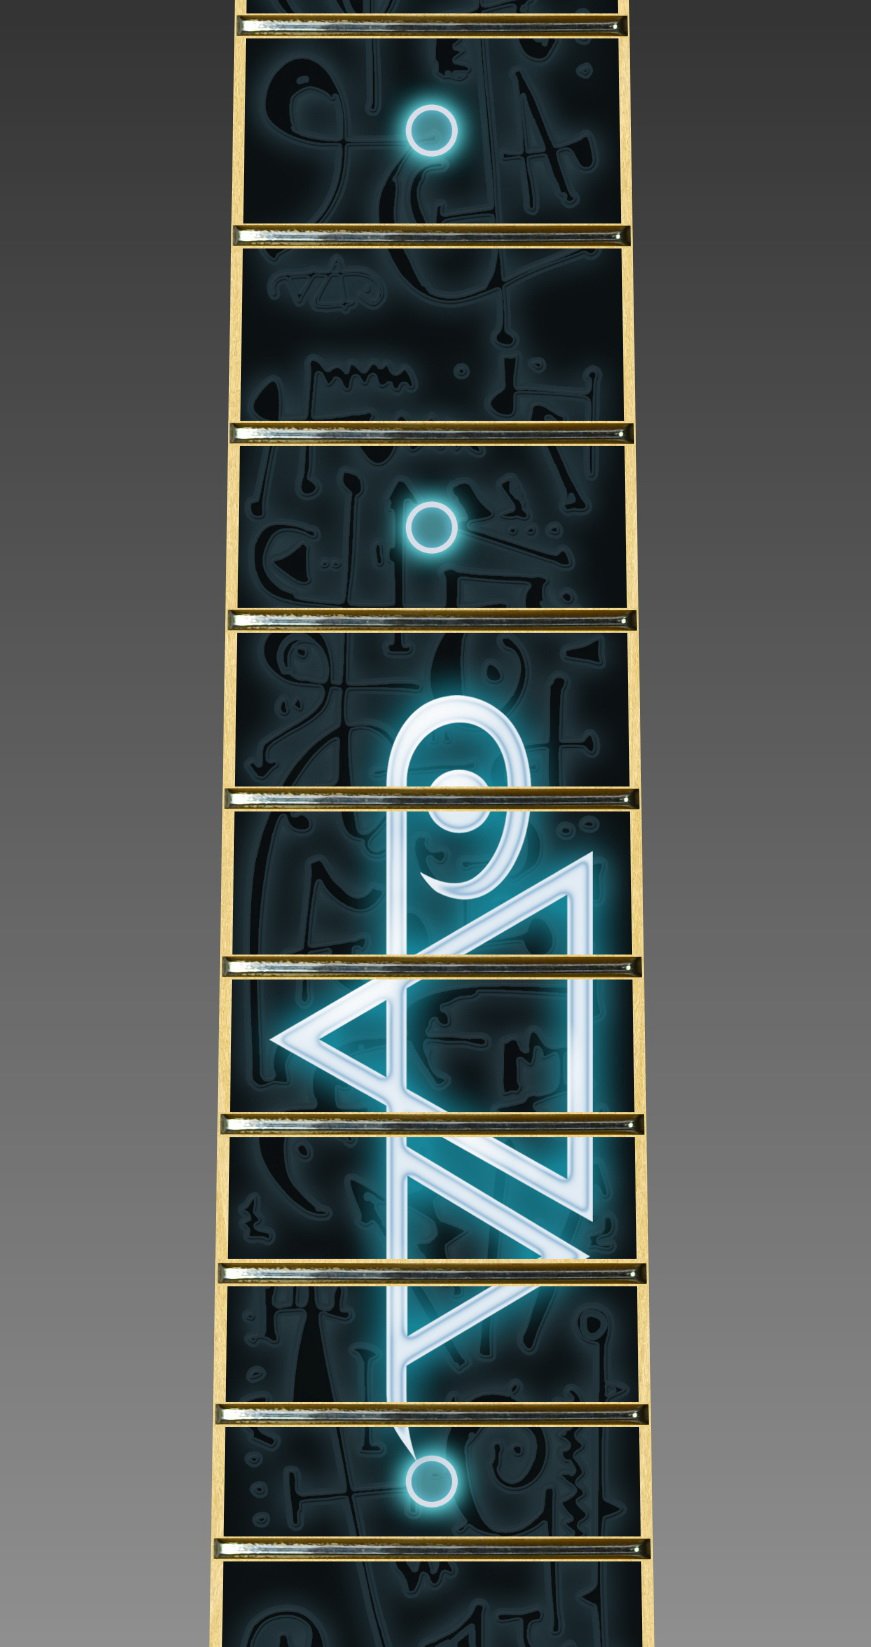 up close image of a fret protector that is black with dark colored symbols throughout. descending from the center of the fret protector is a glowing light blue and white steve vai logo.  The steve vai logo makes the word "vai" with an upside down triangle, a right side up one, and a line going across the triangles with a curl at the end next to the triangle that is upright. 